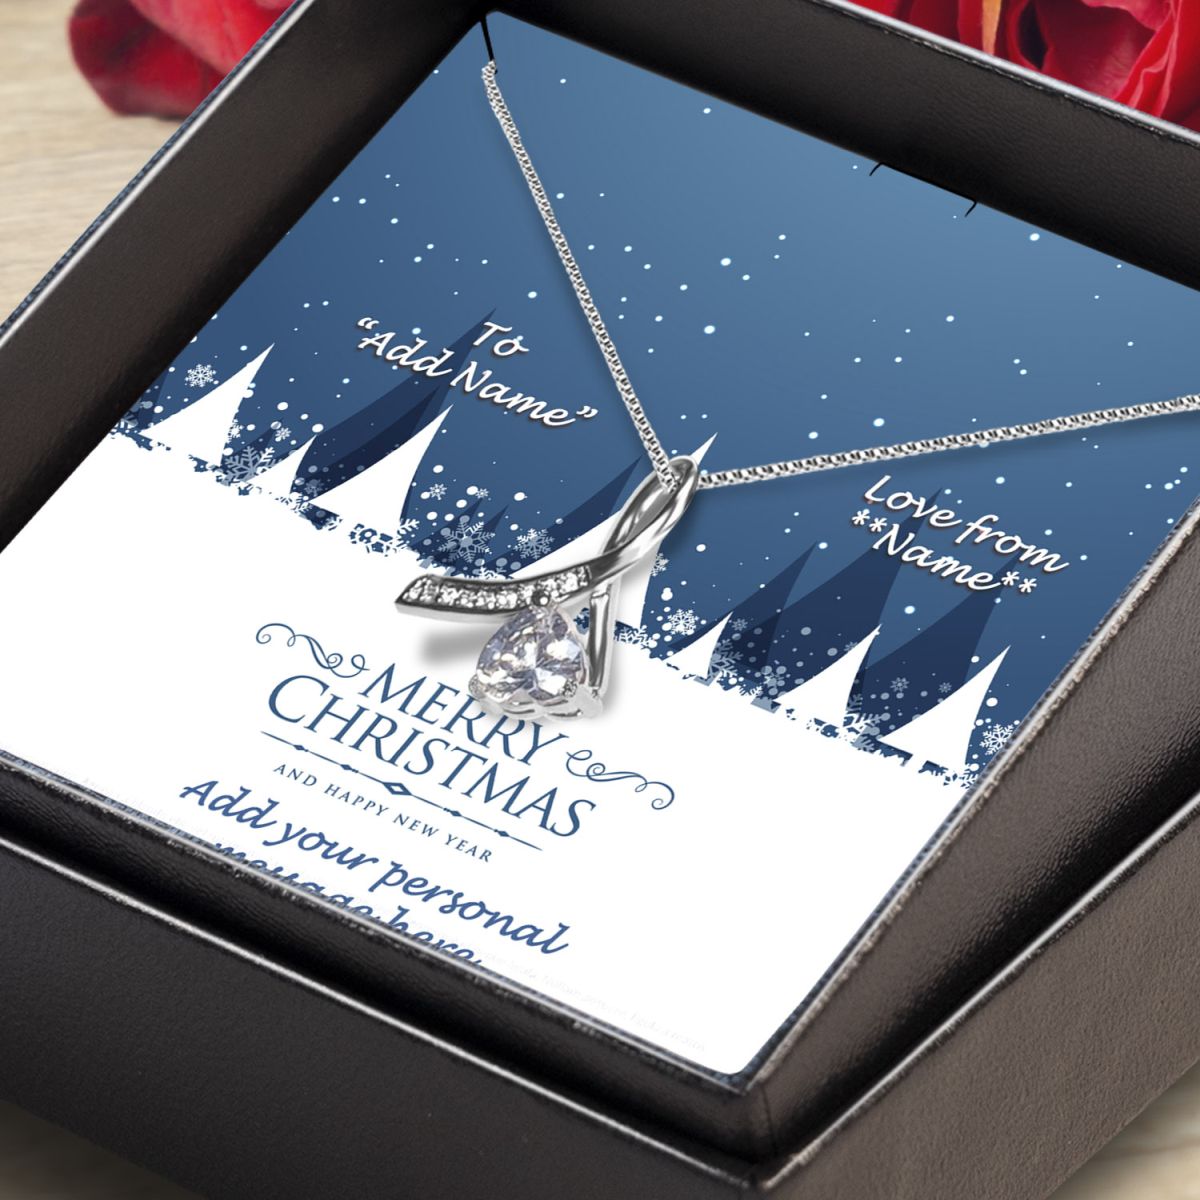 BIG-On-Jewellery-Necklace-Angled-close-up-Enchanting-Ribbon-Merry-Xmas-personal-message-2